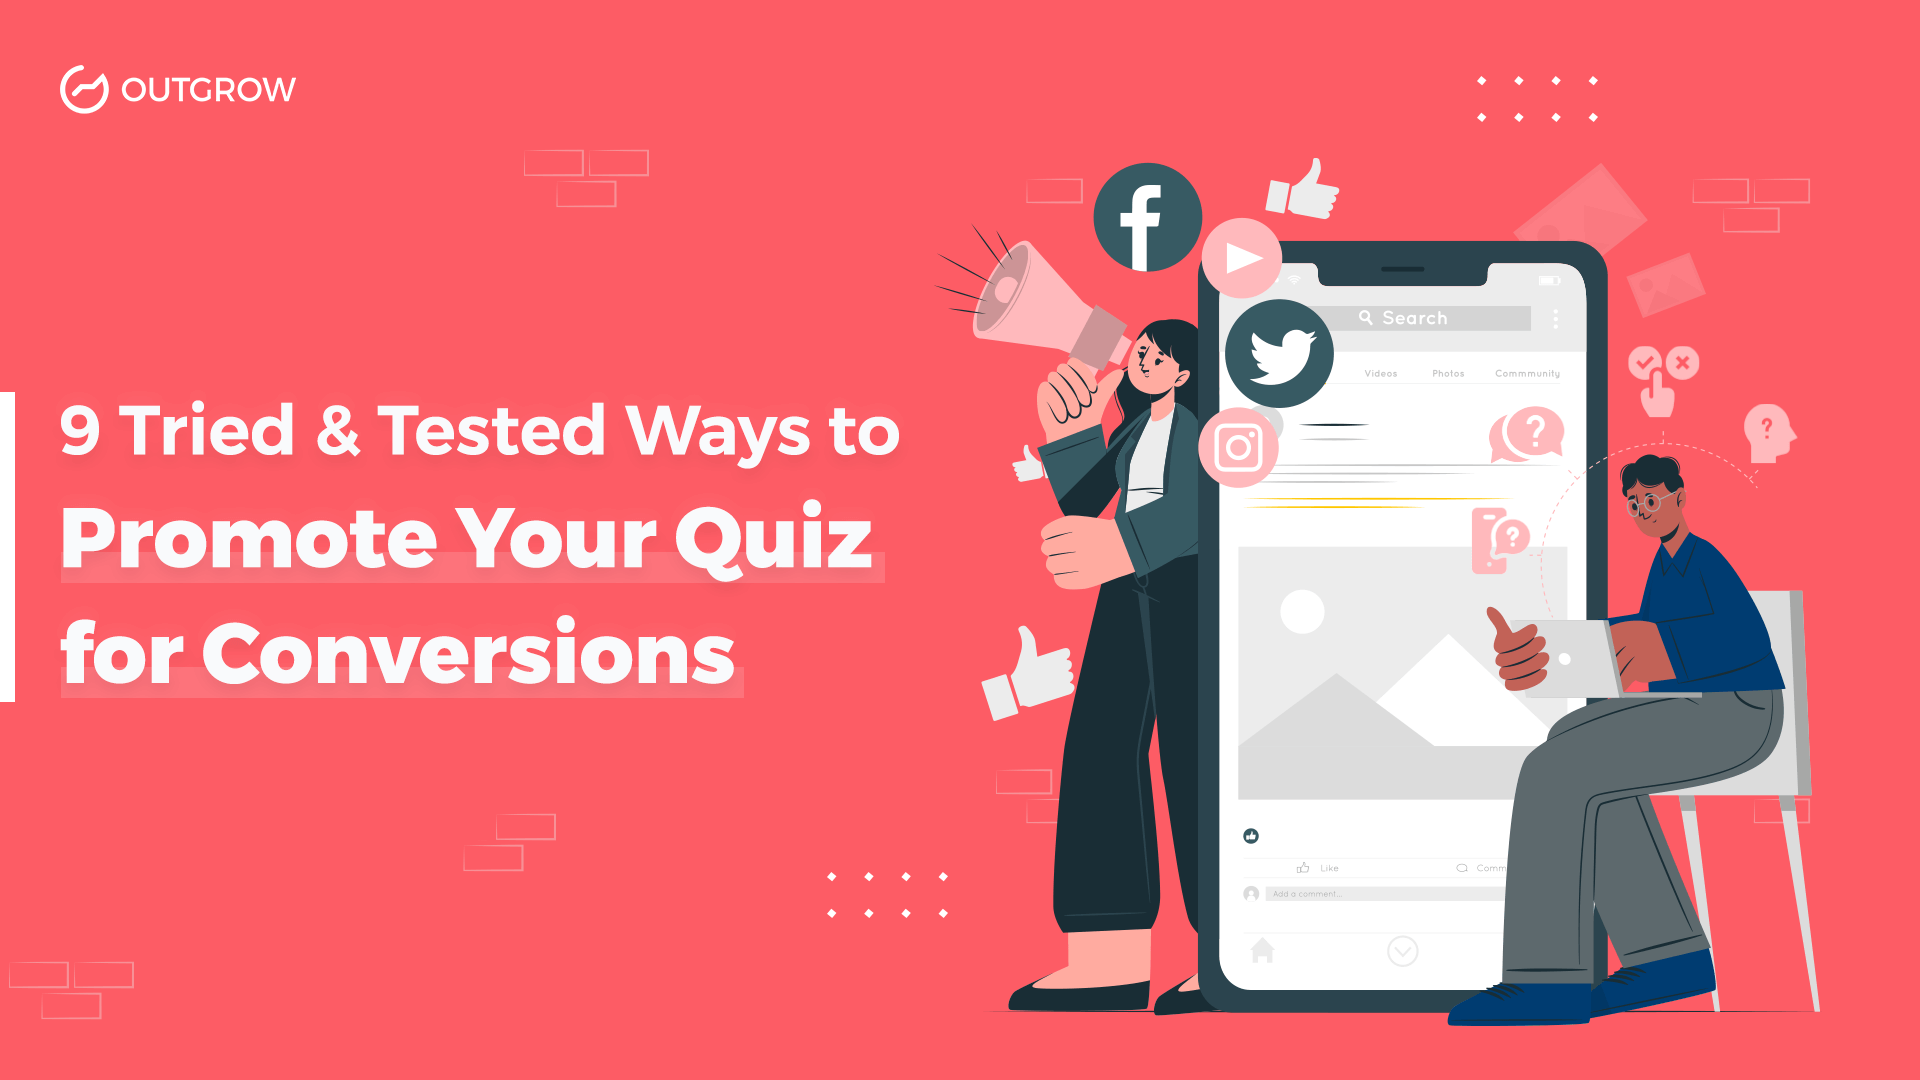 9 Tried & Tested Ways to Promote Your Quiz for Conversions